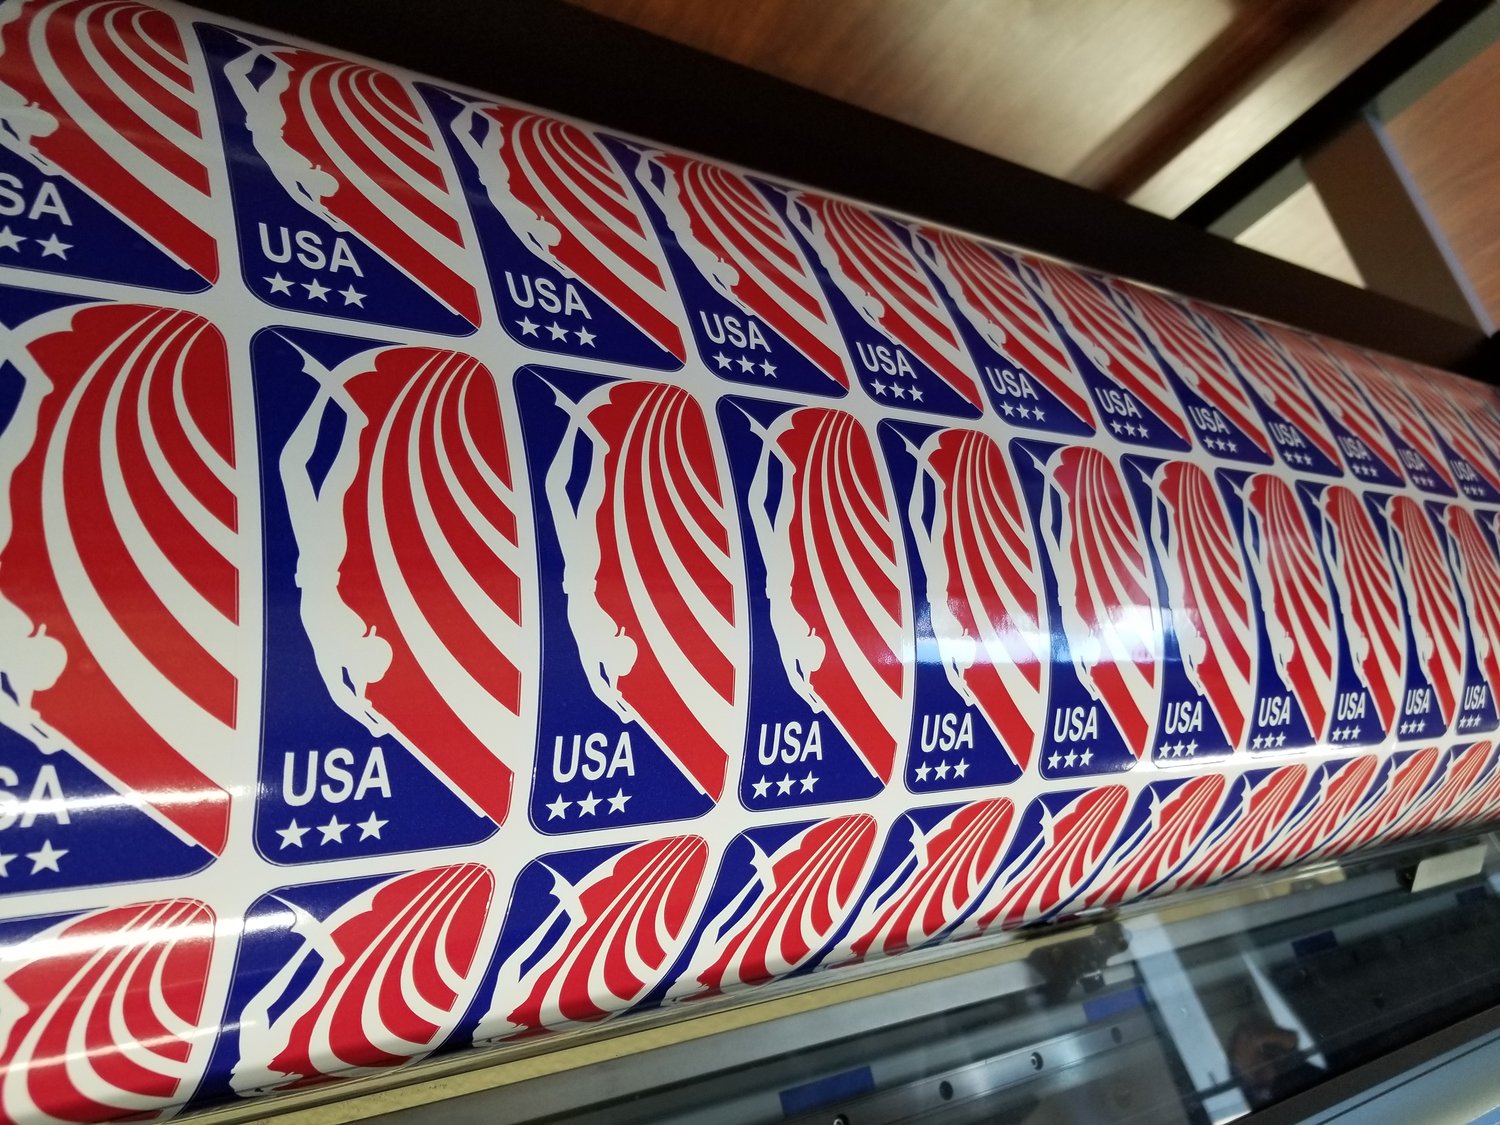 Image of Team usa spearfishing decals